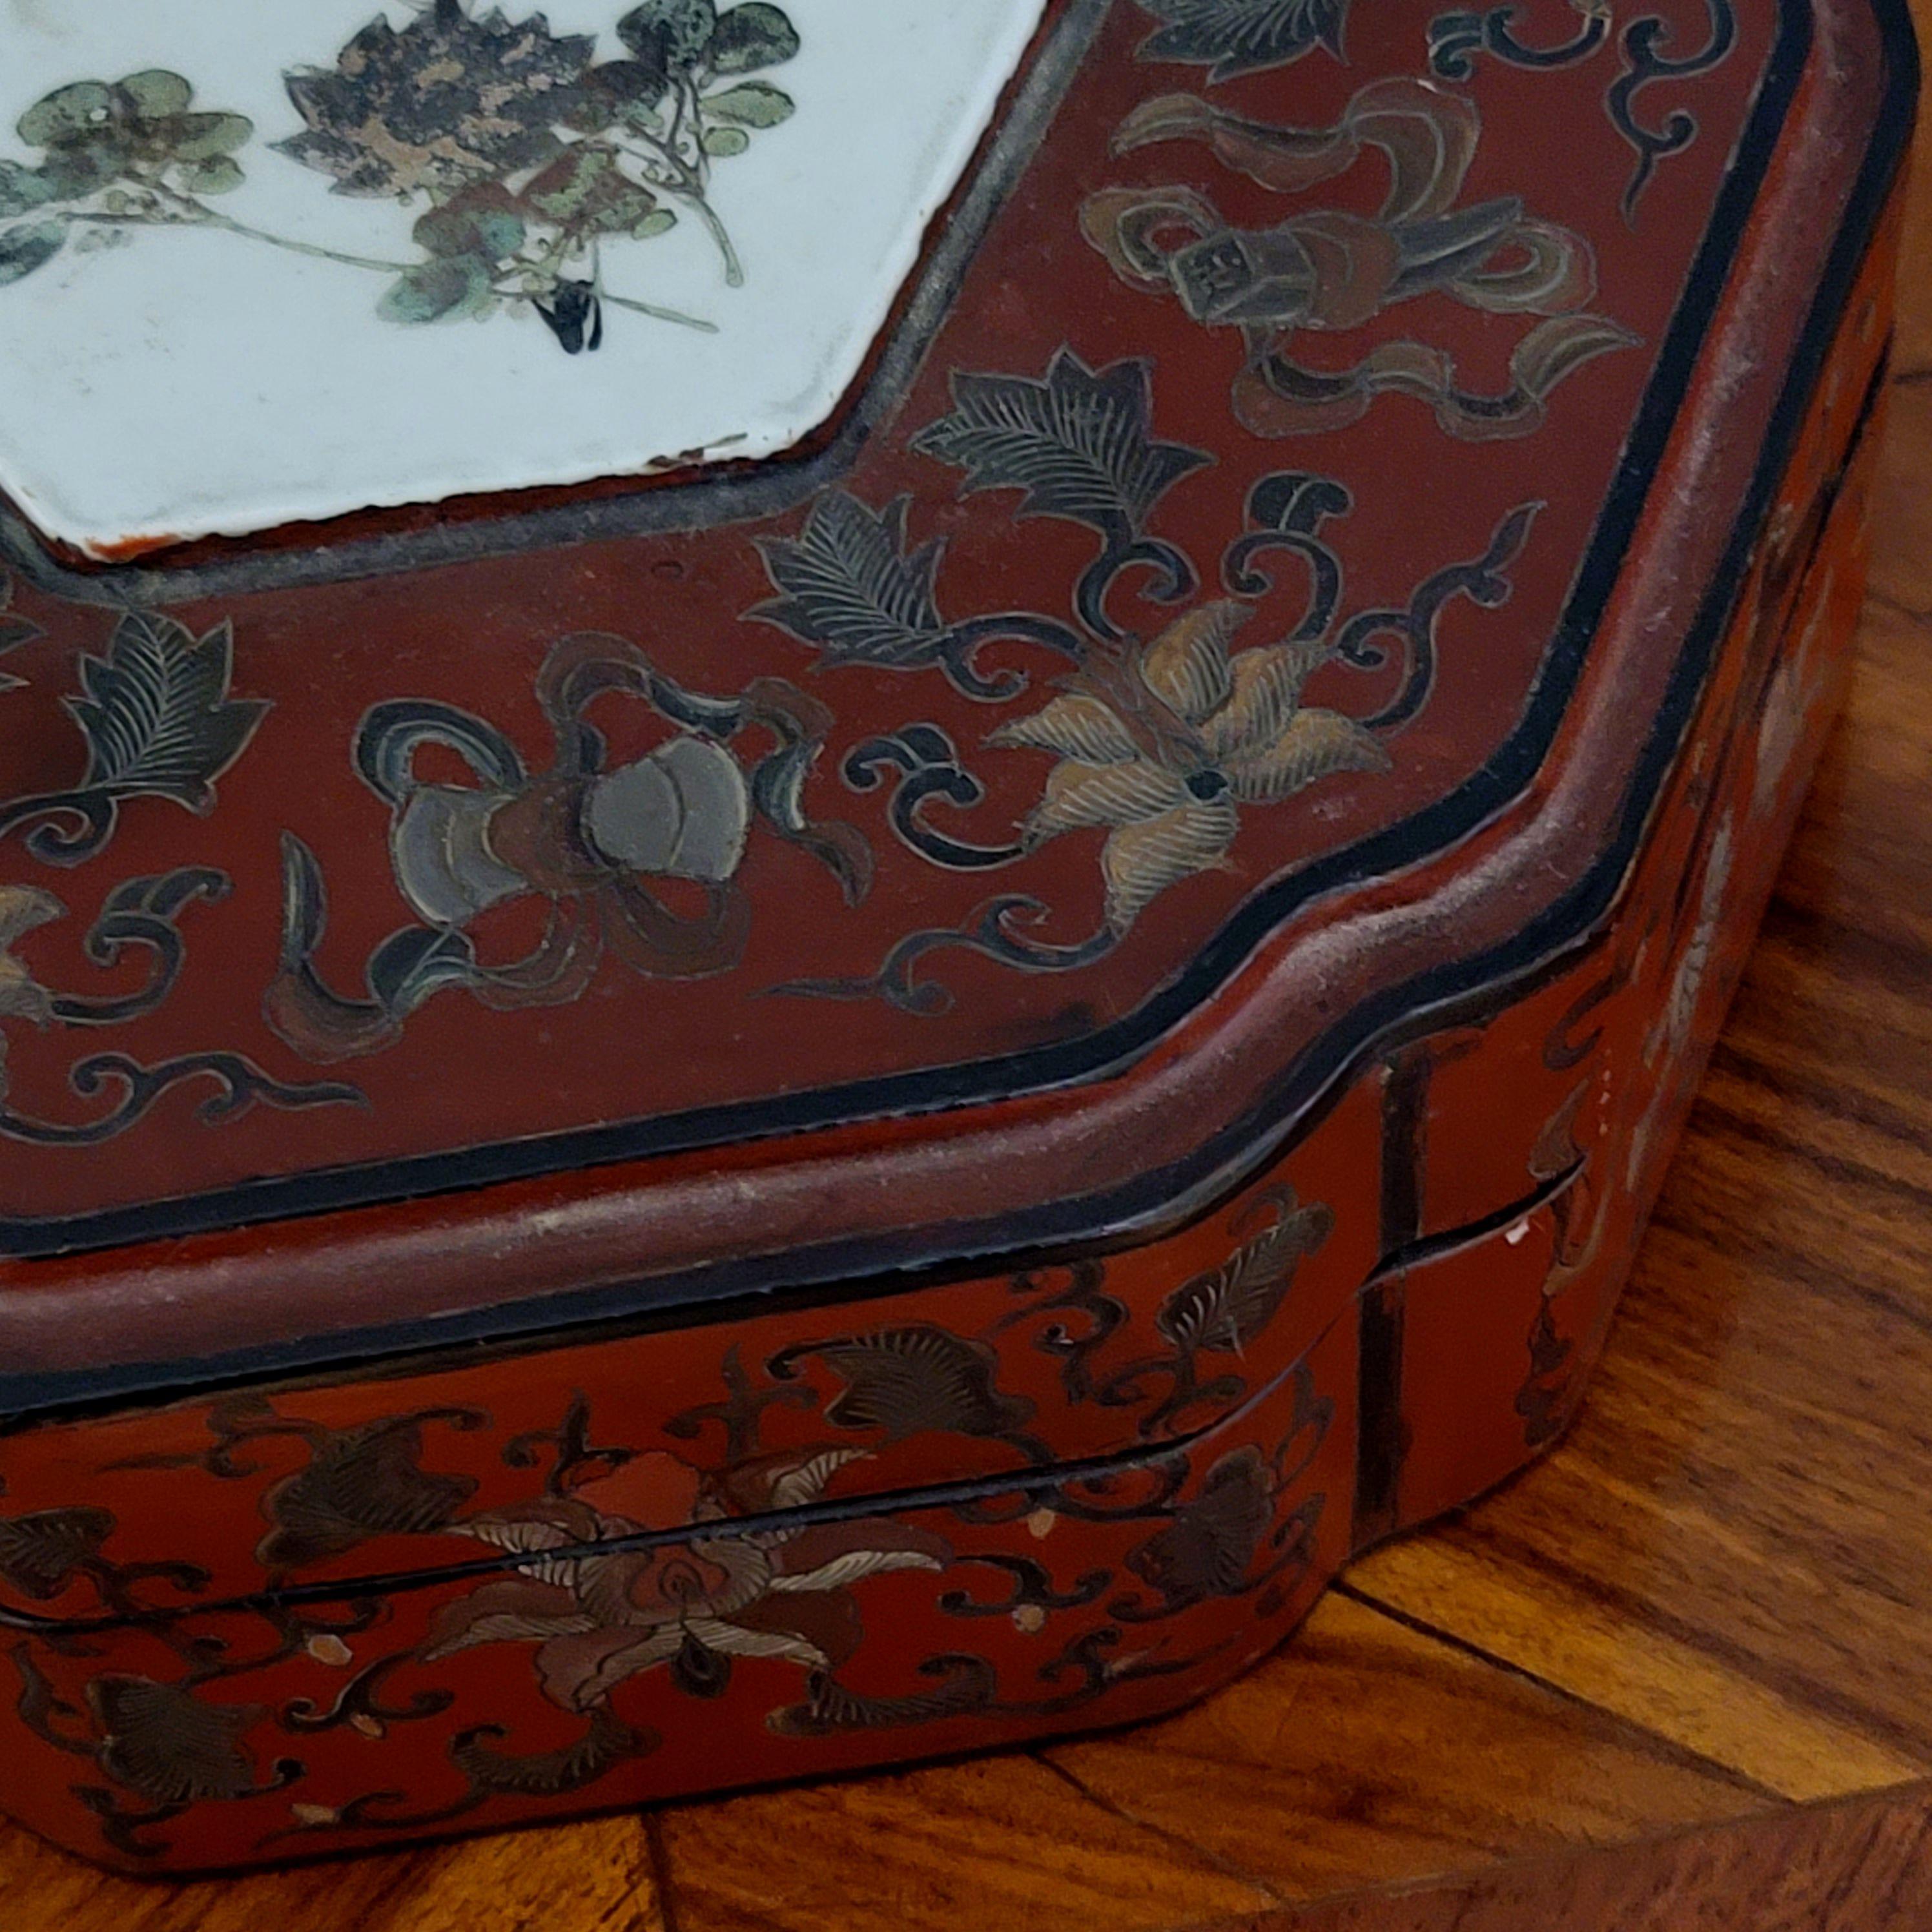 Large Chinese Gilt Lacquered Box with Porcelain Medallion In Good Condition For Sale In Norton, MA